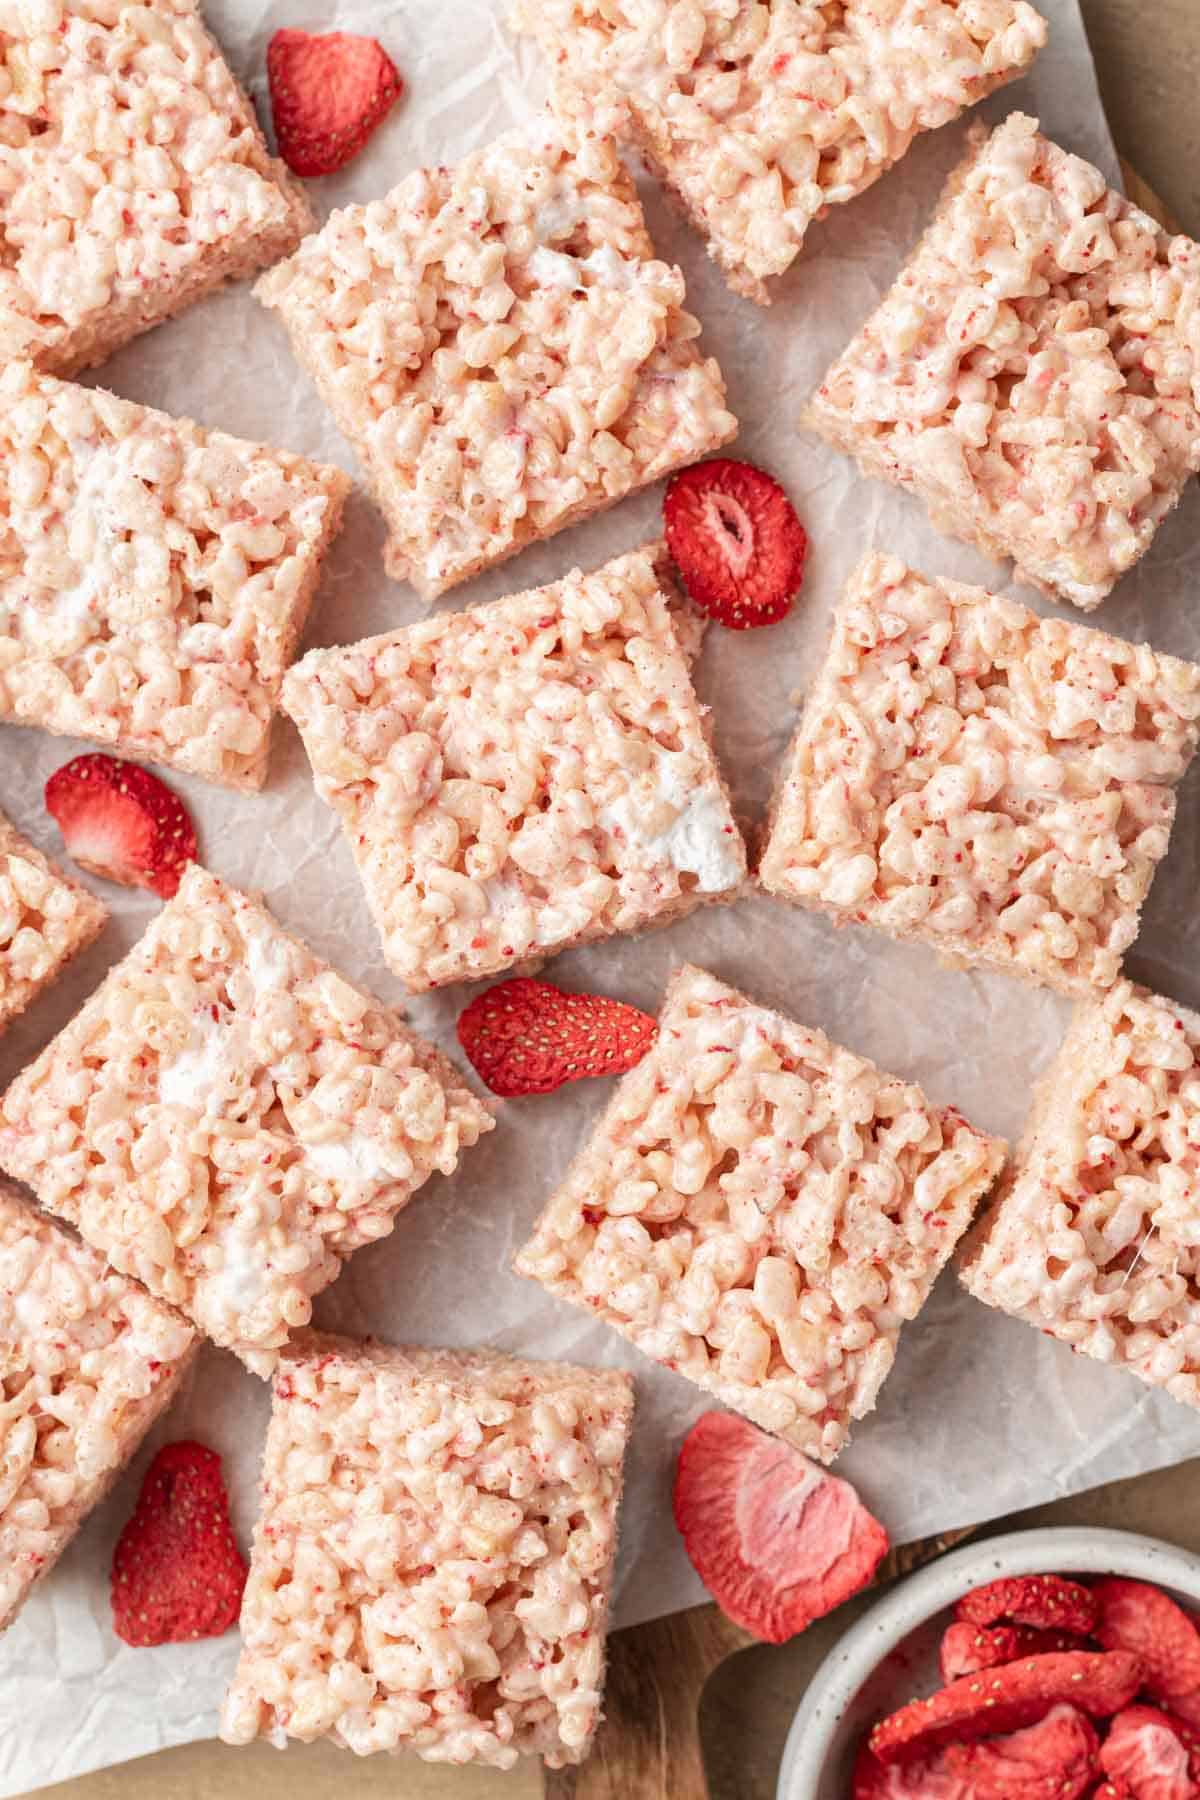 freshly made strawberry rice krispie treats sitting on parchment paper with freezer dried strawberries surrounding them.